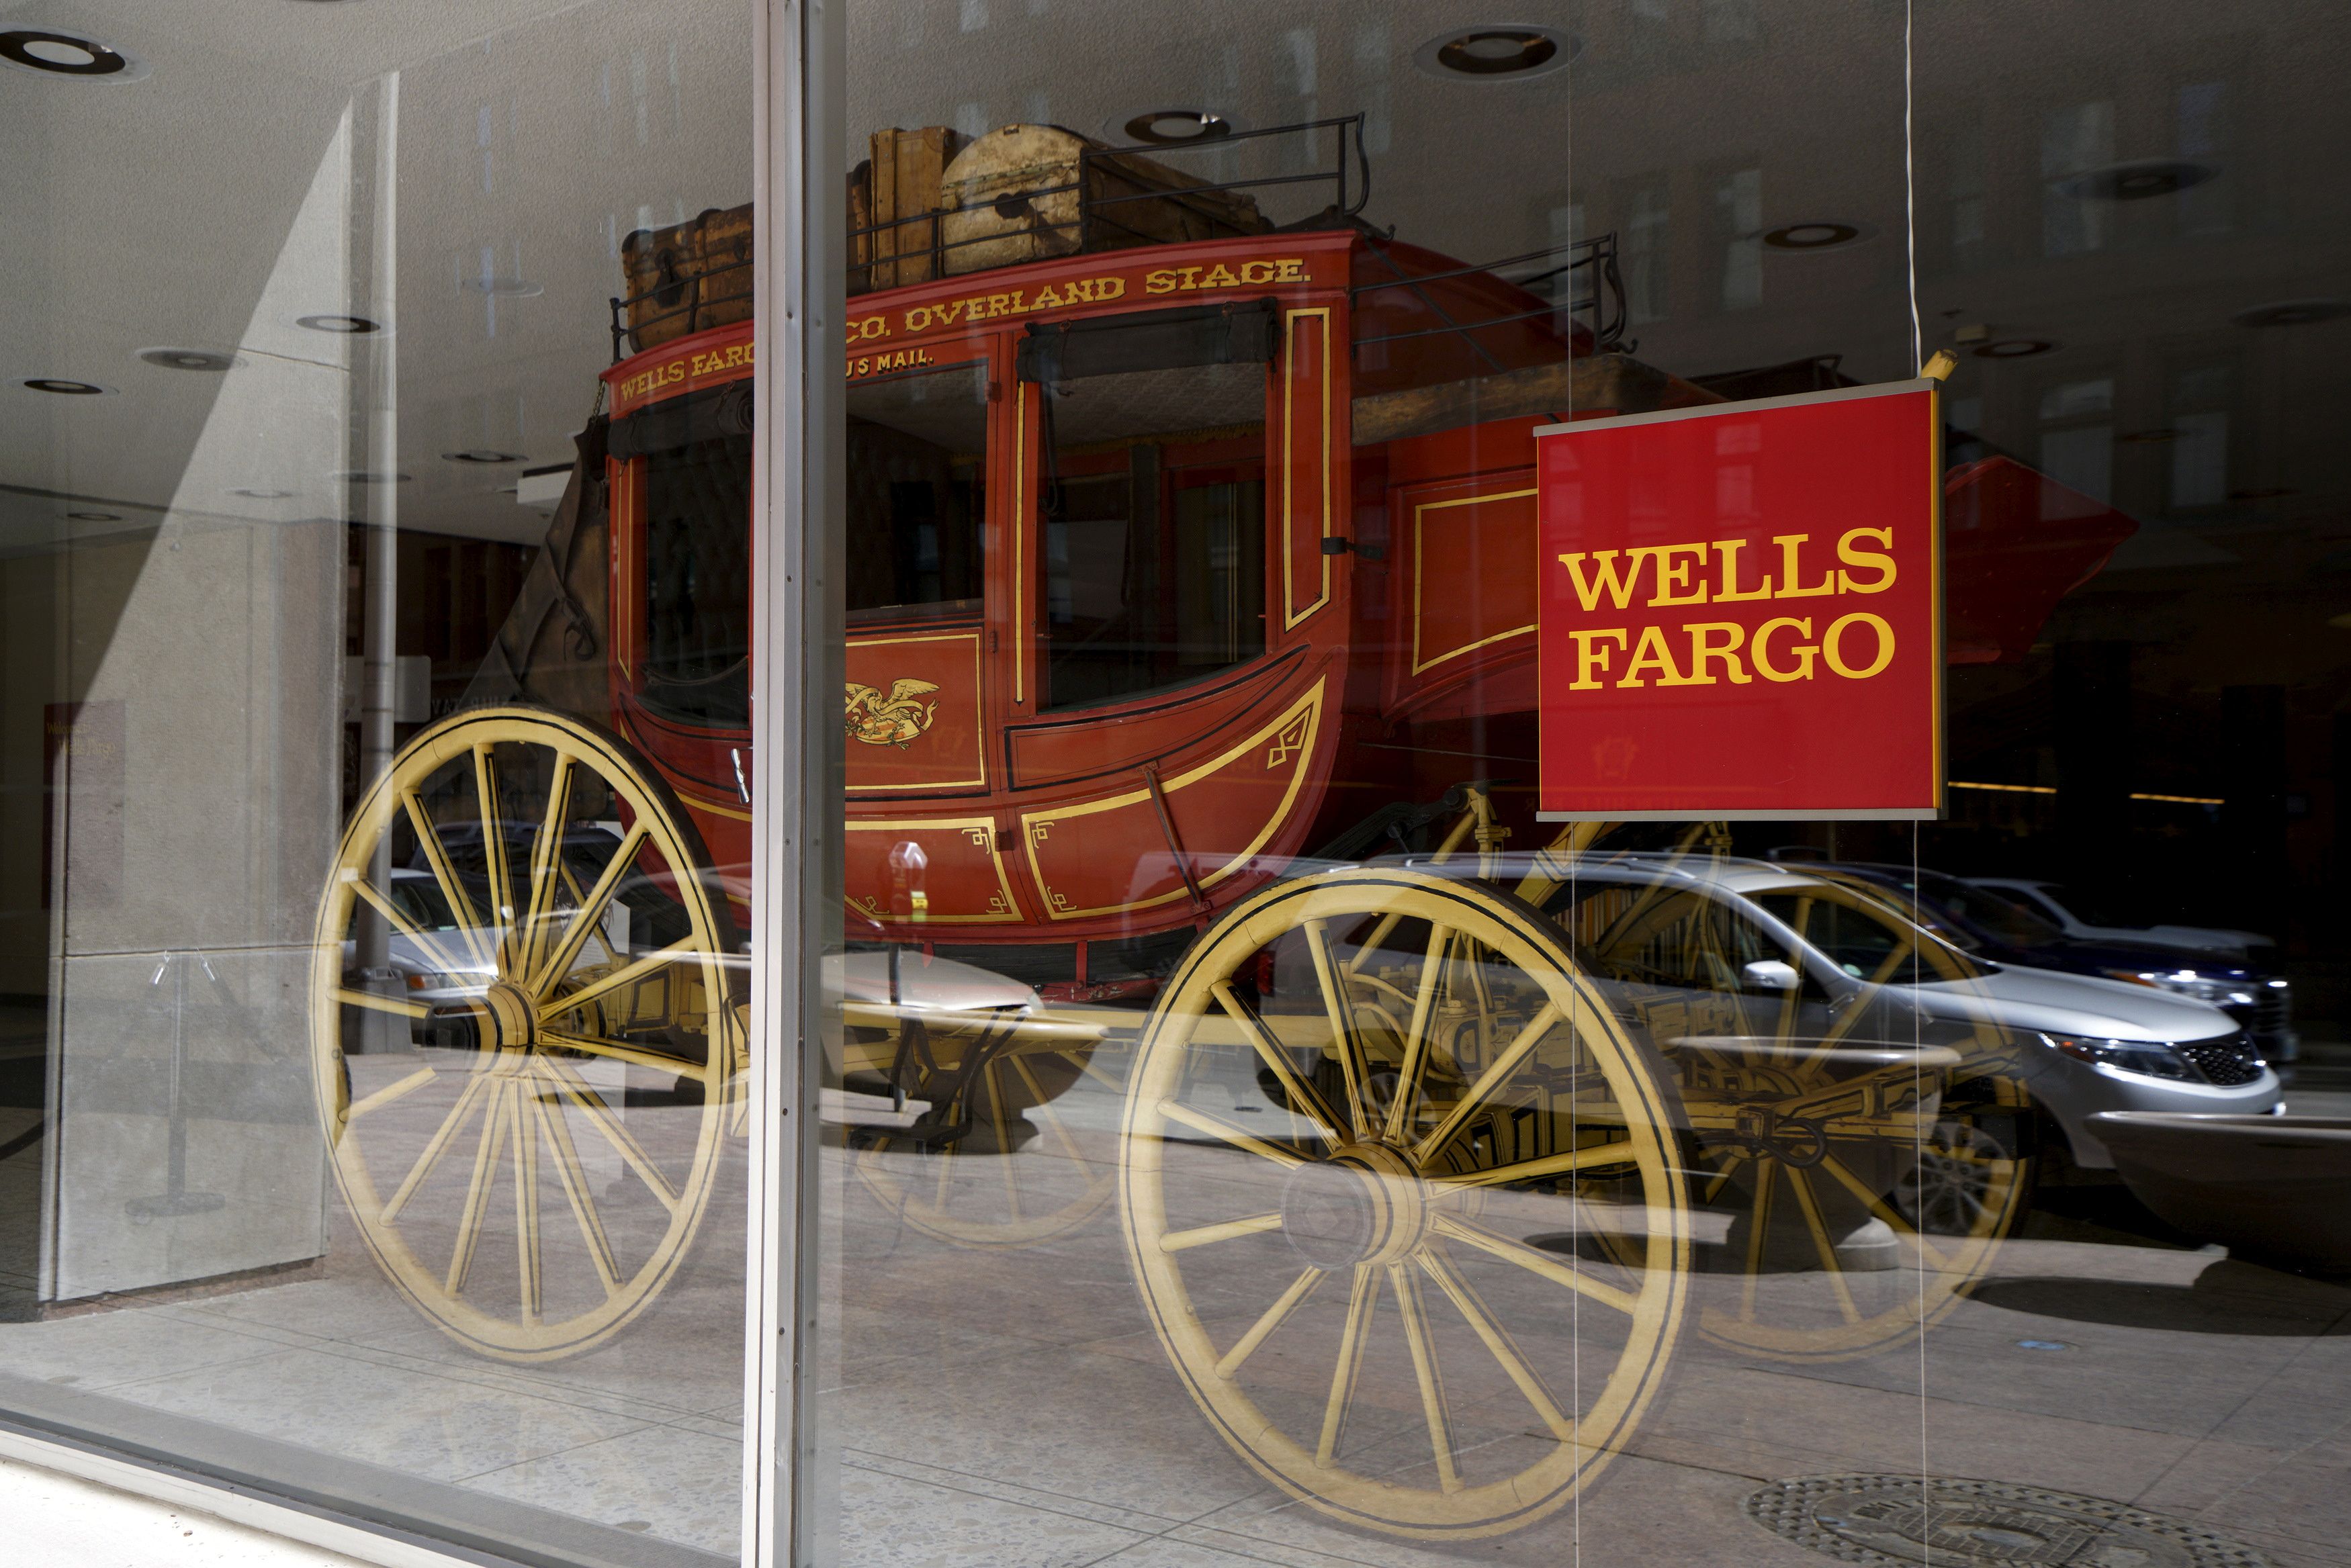 FILE PHOTO: An 1860's era stagecoach is displayed at the Wells Fargo & Co. bank in downtown Denver